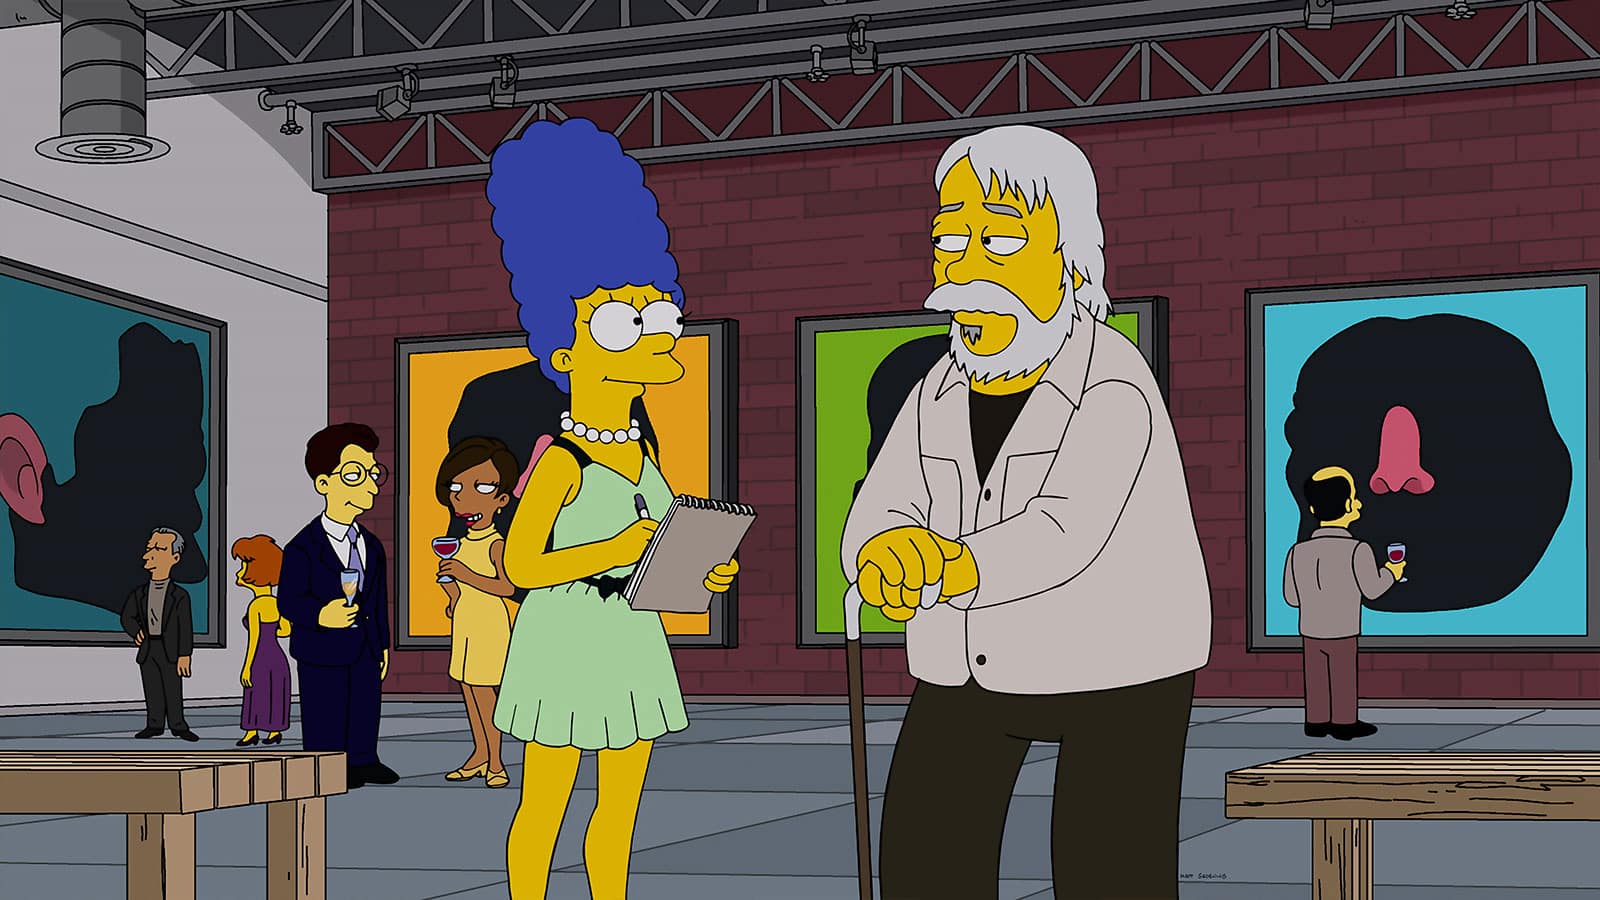 Still from "The Simpsons" of Marge interviewing John Baldessari in an art gallery